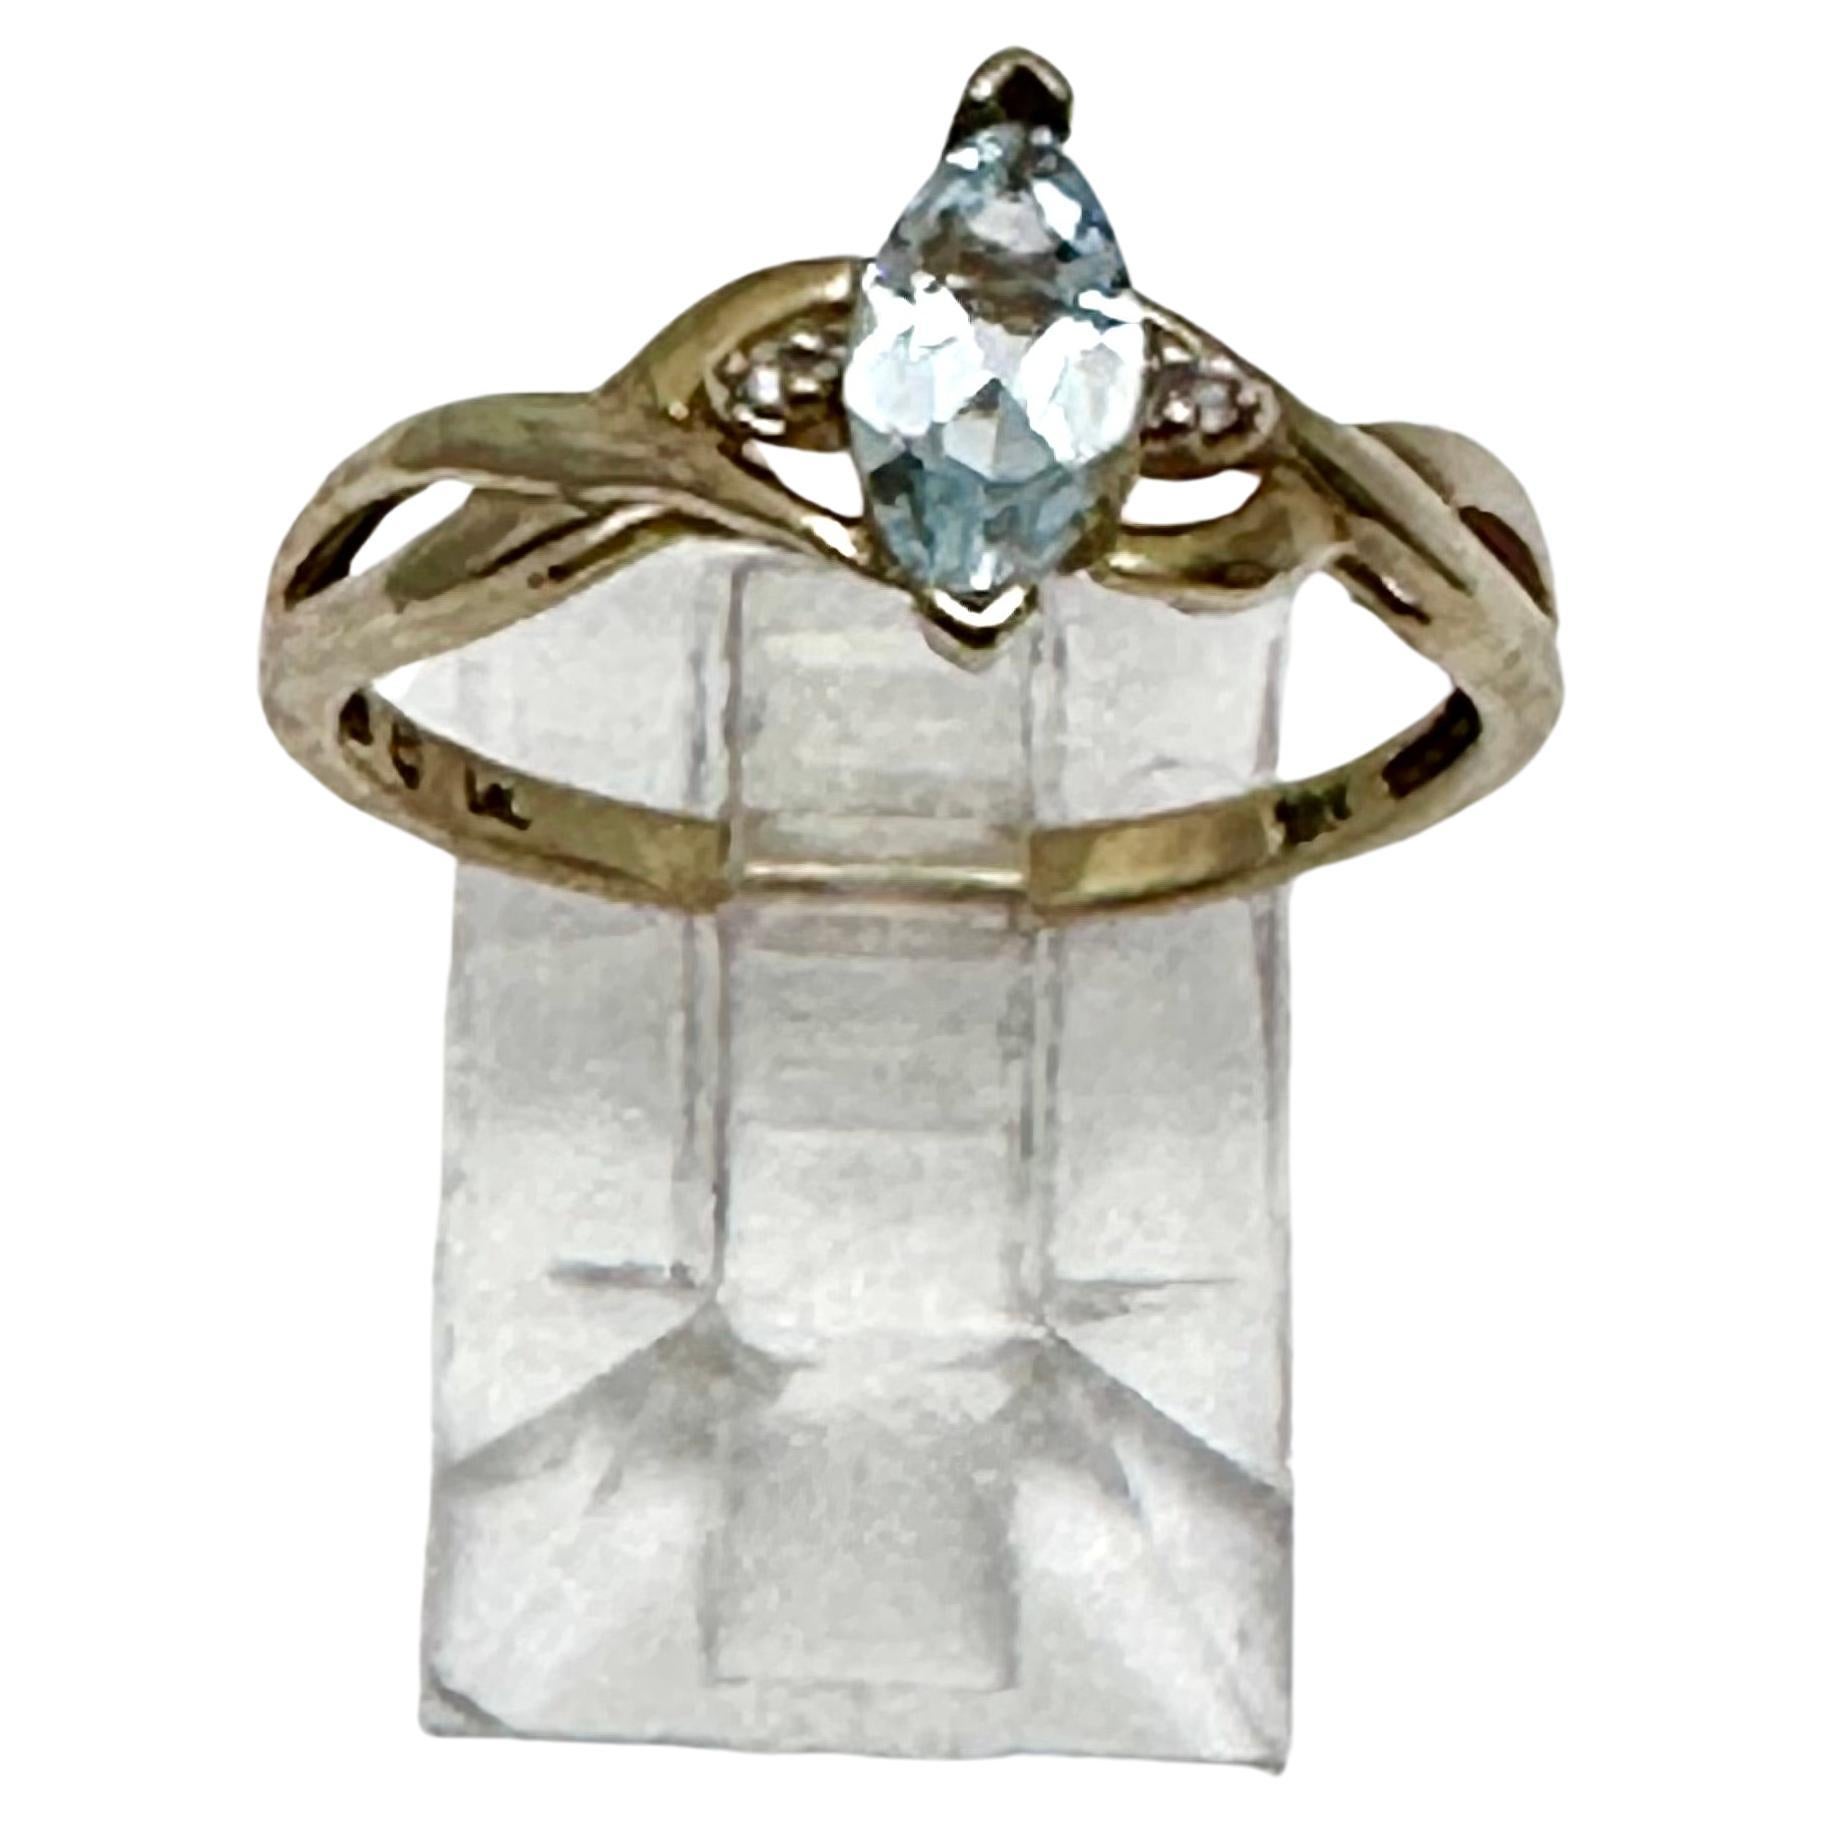 10k Yellow Gold 4mm x 8mm Marquise Blue Topaz 
2 Diamonds ~ Ring Size 7

Blue Topaz Meaning:

This vivacious blue gemstone is known as the stone of clarity. The Blue Topaz meaning allows you to channel your inner wisdom and find the perfect pathways